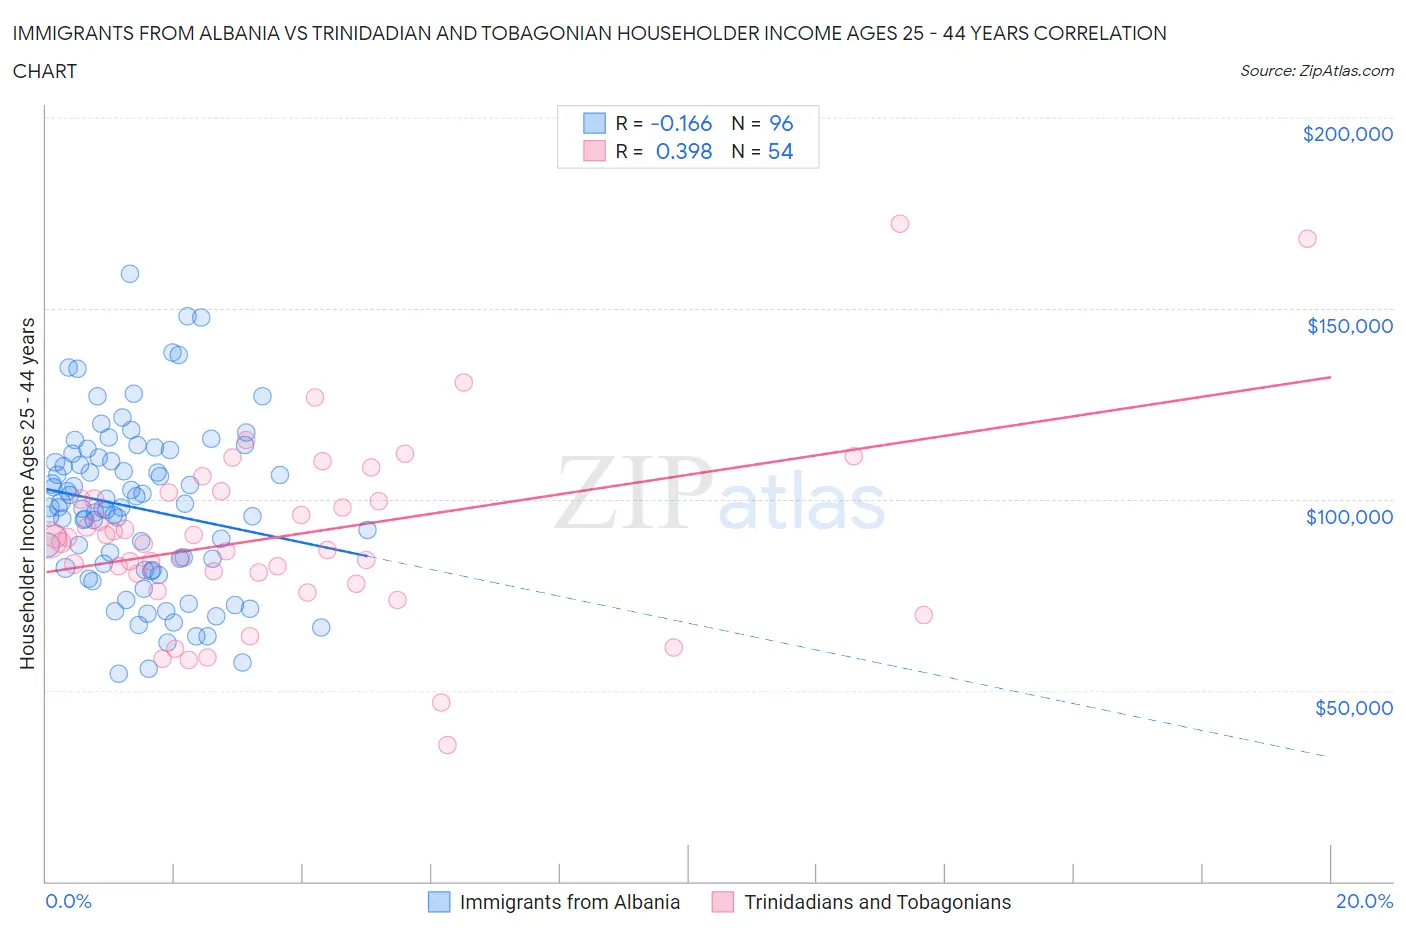 Immigrants from Albania vs Trinidadian and Tobagonian Householder Income Ages 25 - 44 years